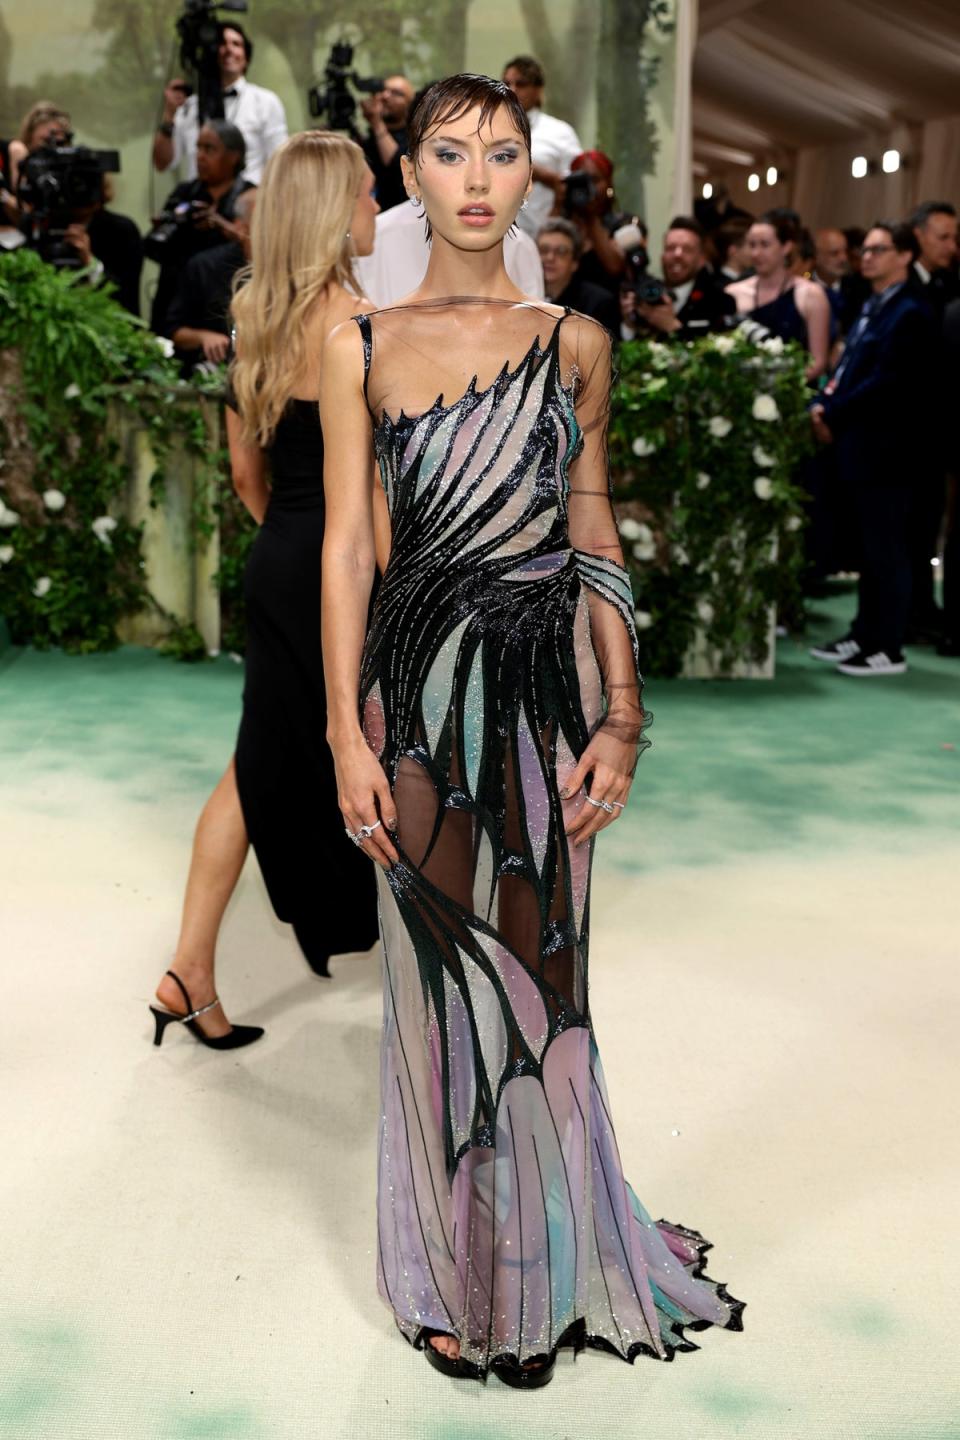 Iris Law in Versace  (Getty Images for The Met Museum/)